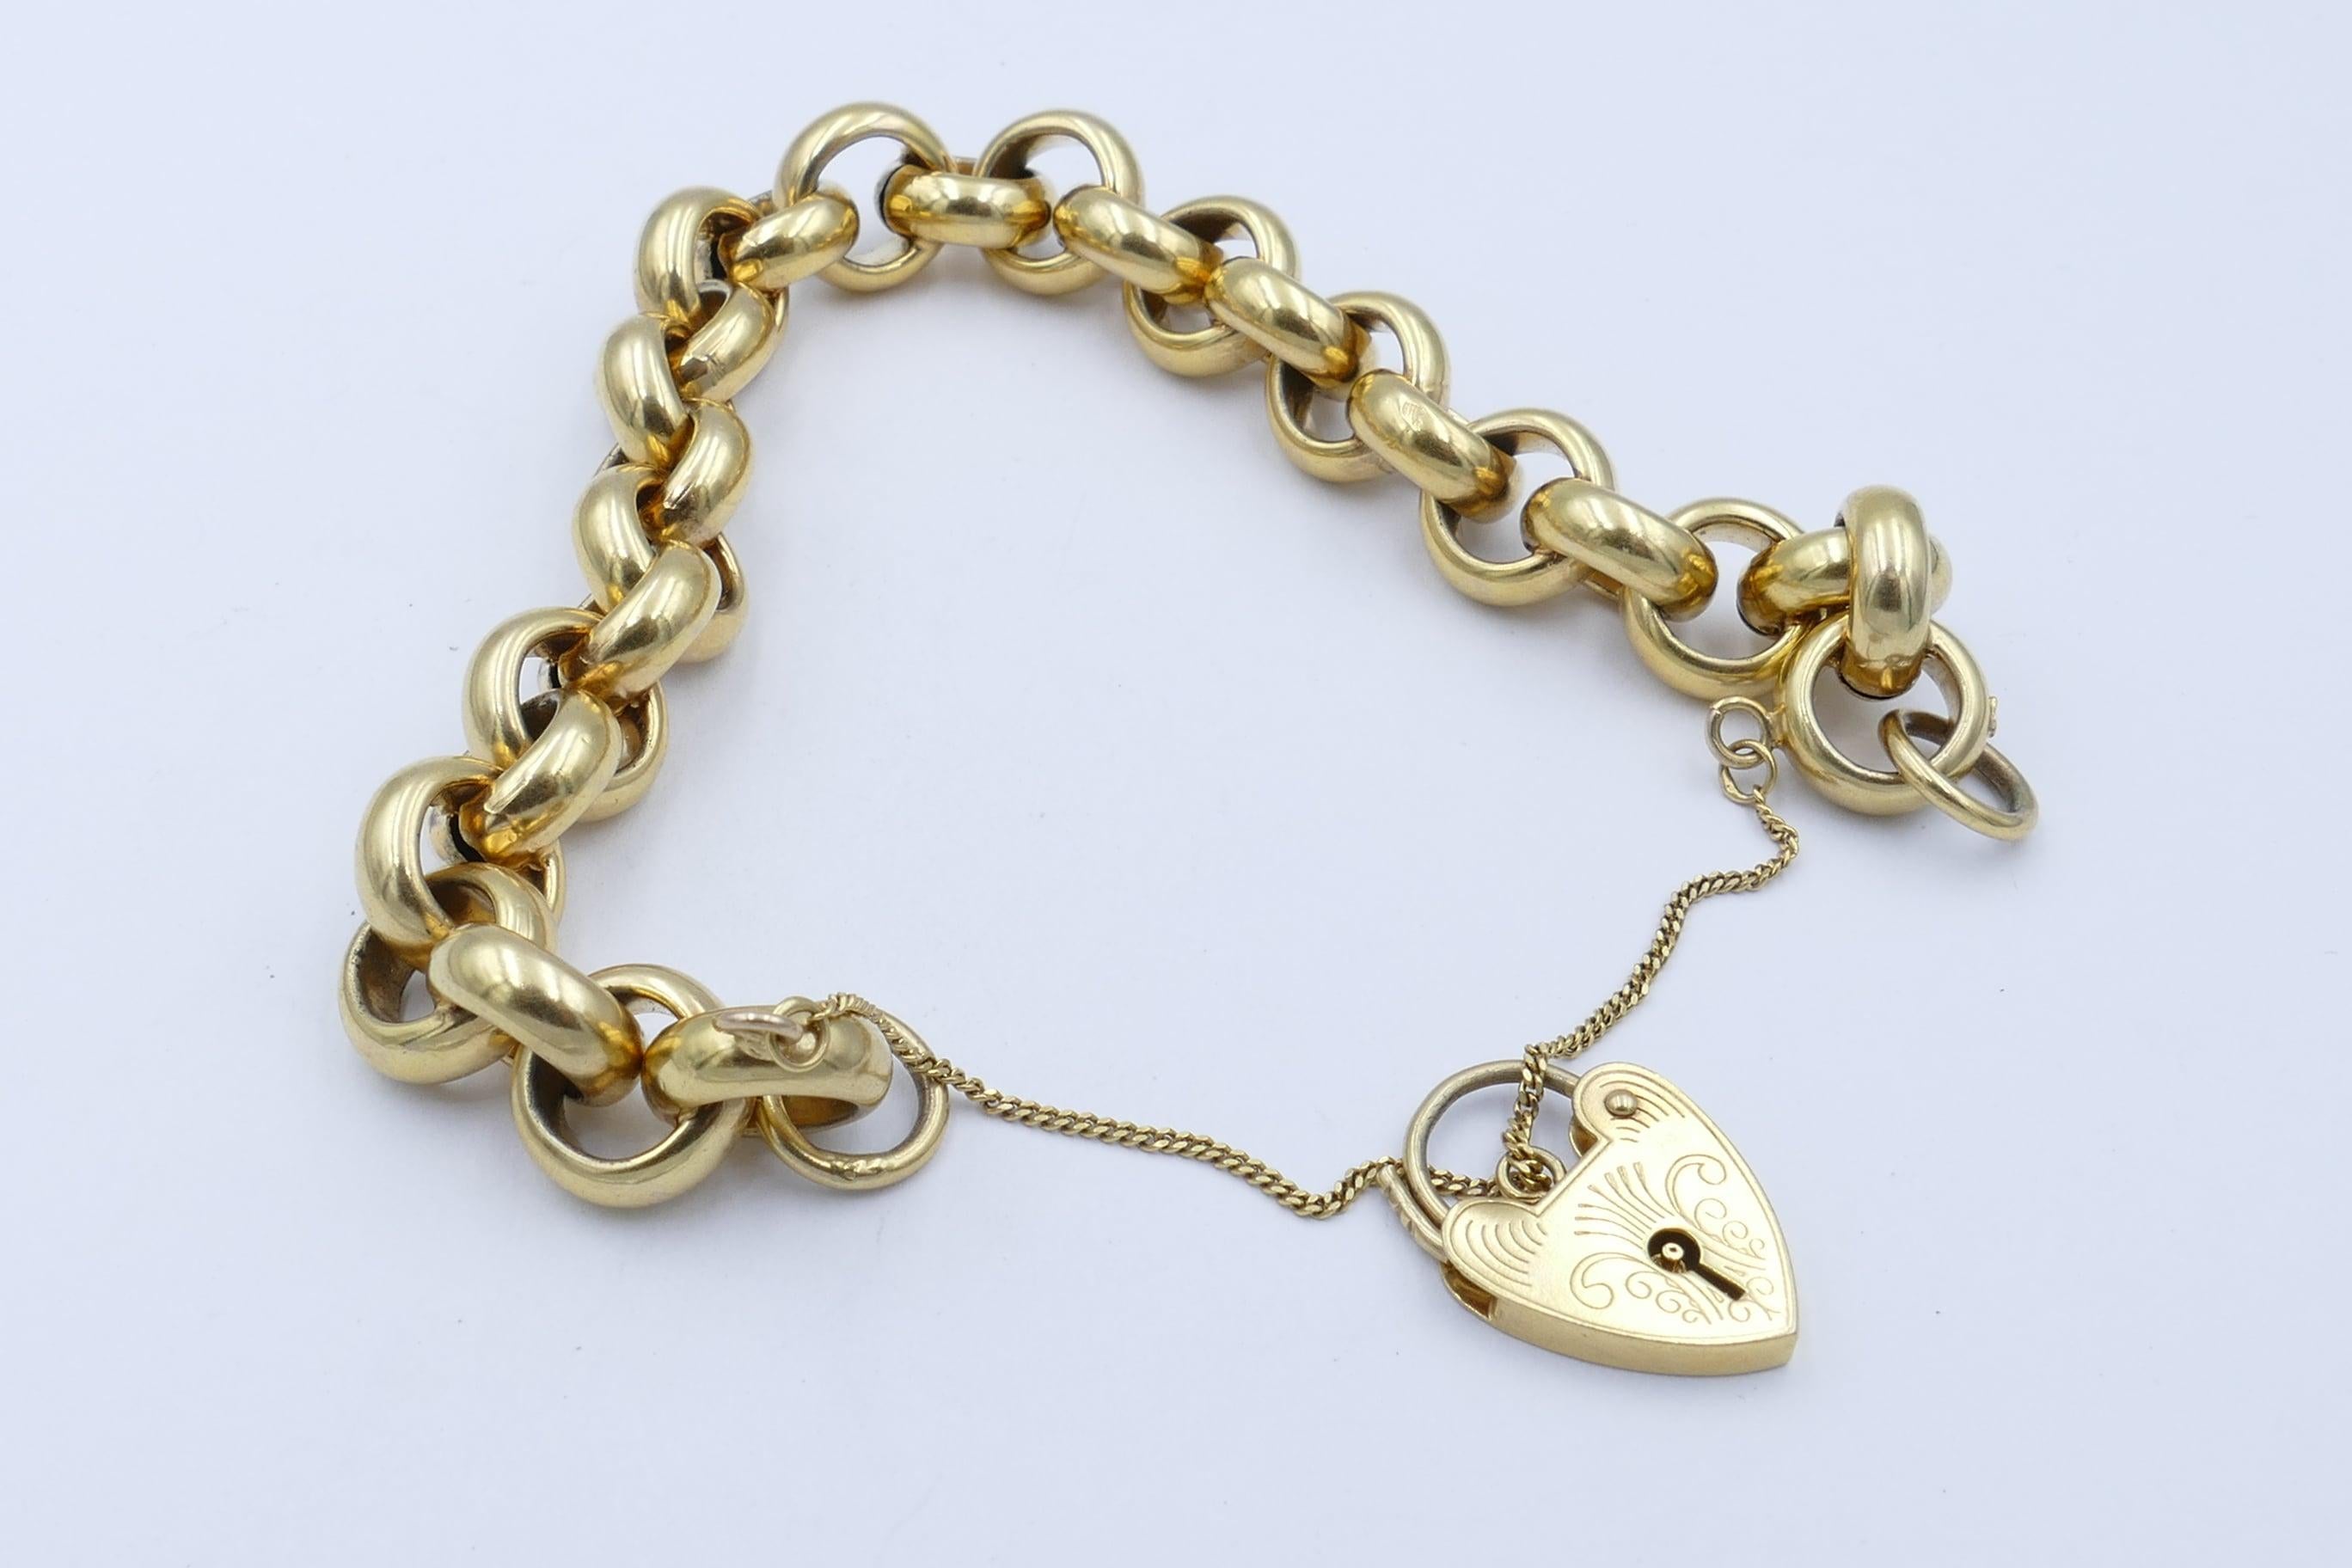 This is a beautiful 9ct yellow Gold Belcher Link Bracelet which can be worn daily - and with every outfit.
It has a lovely scrolled Heart Padlock (that can be swapped for other padlocks) and has a very secure safety chain.
The Bracelet measures 18.5